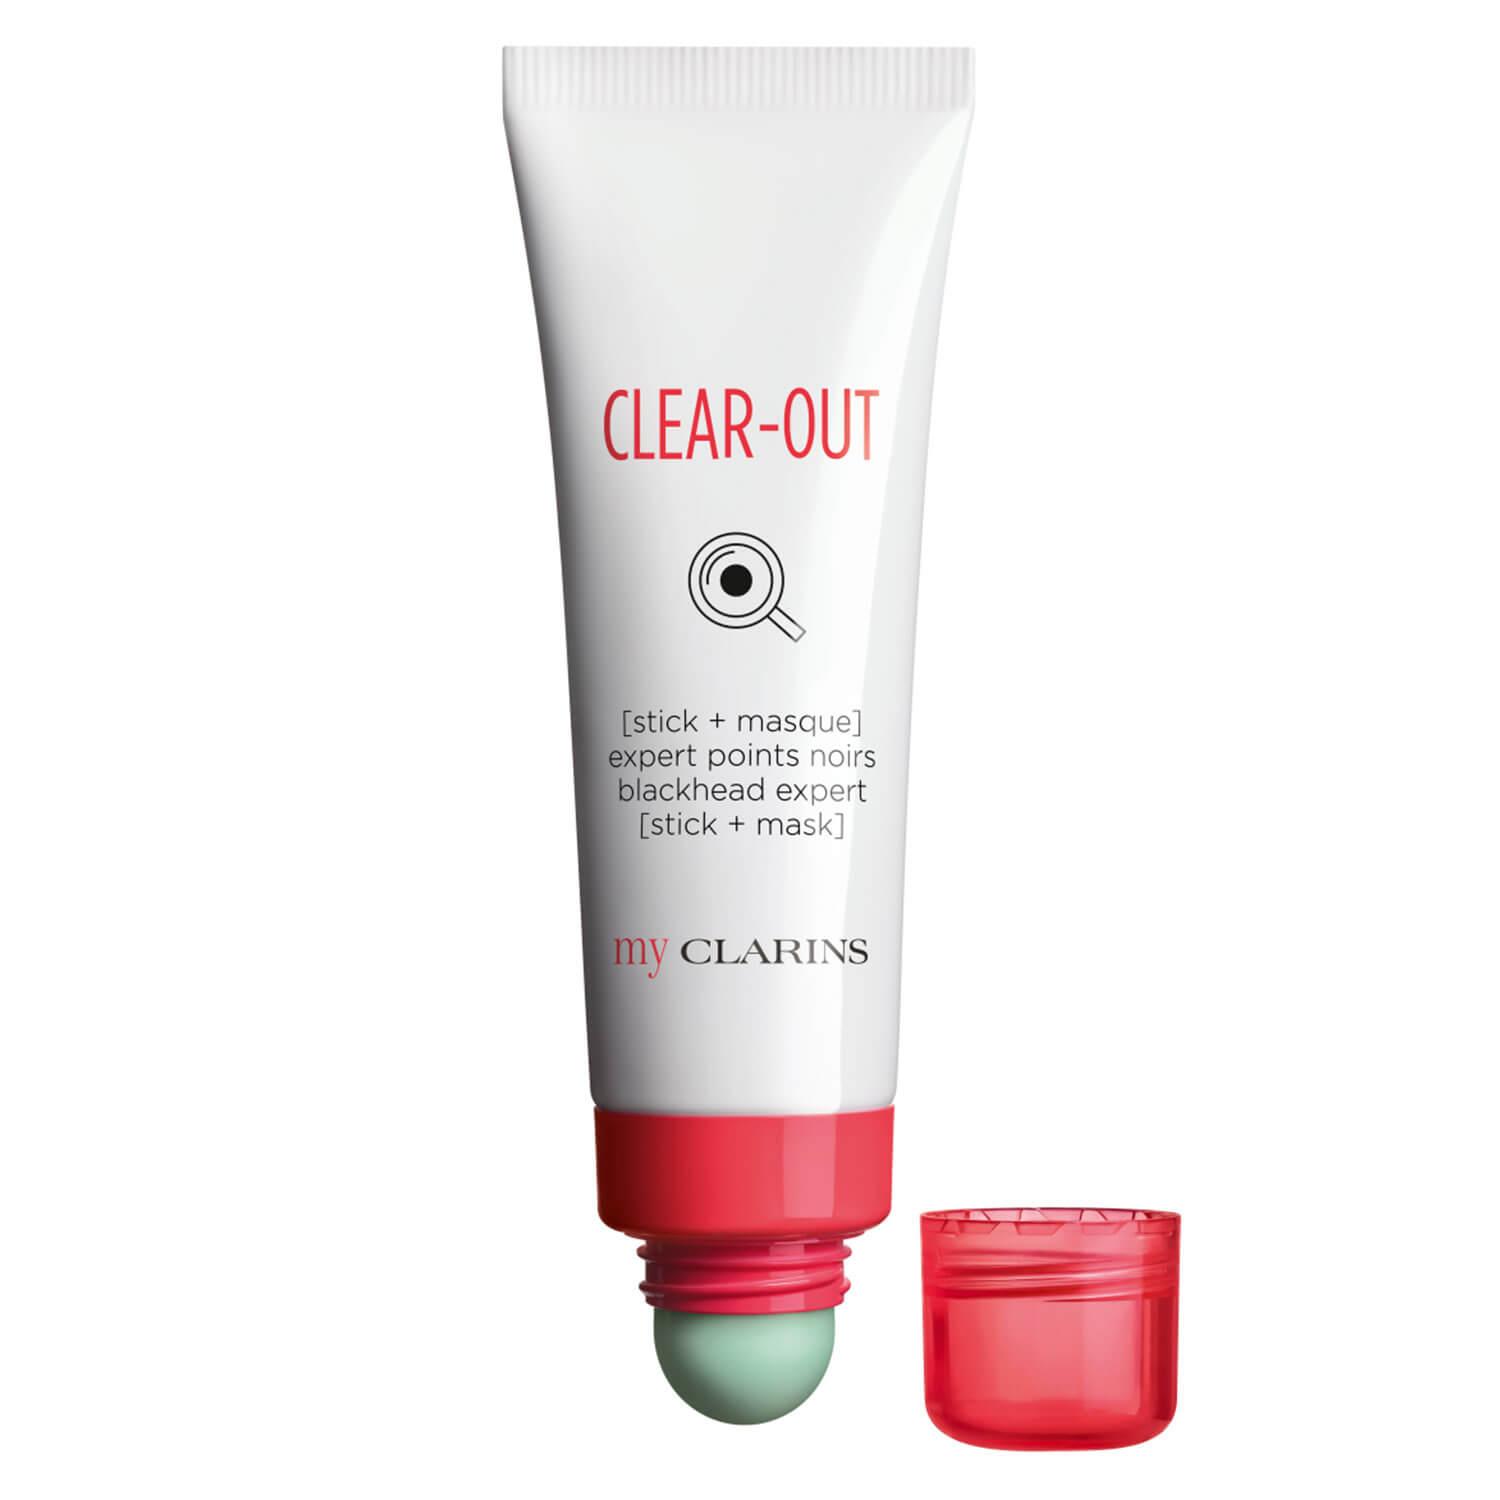 myCLARINS - CLEAR-OUT Blackhead Duo Expert